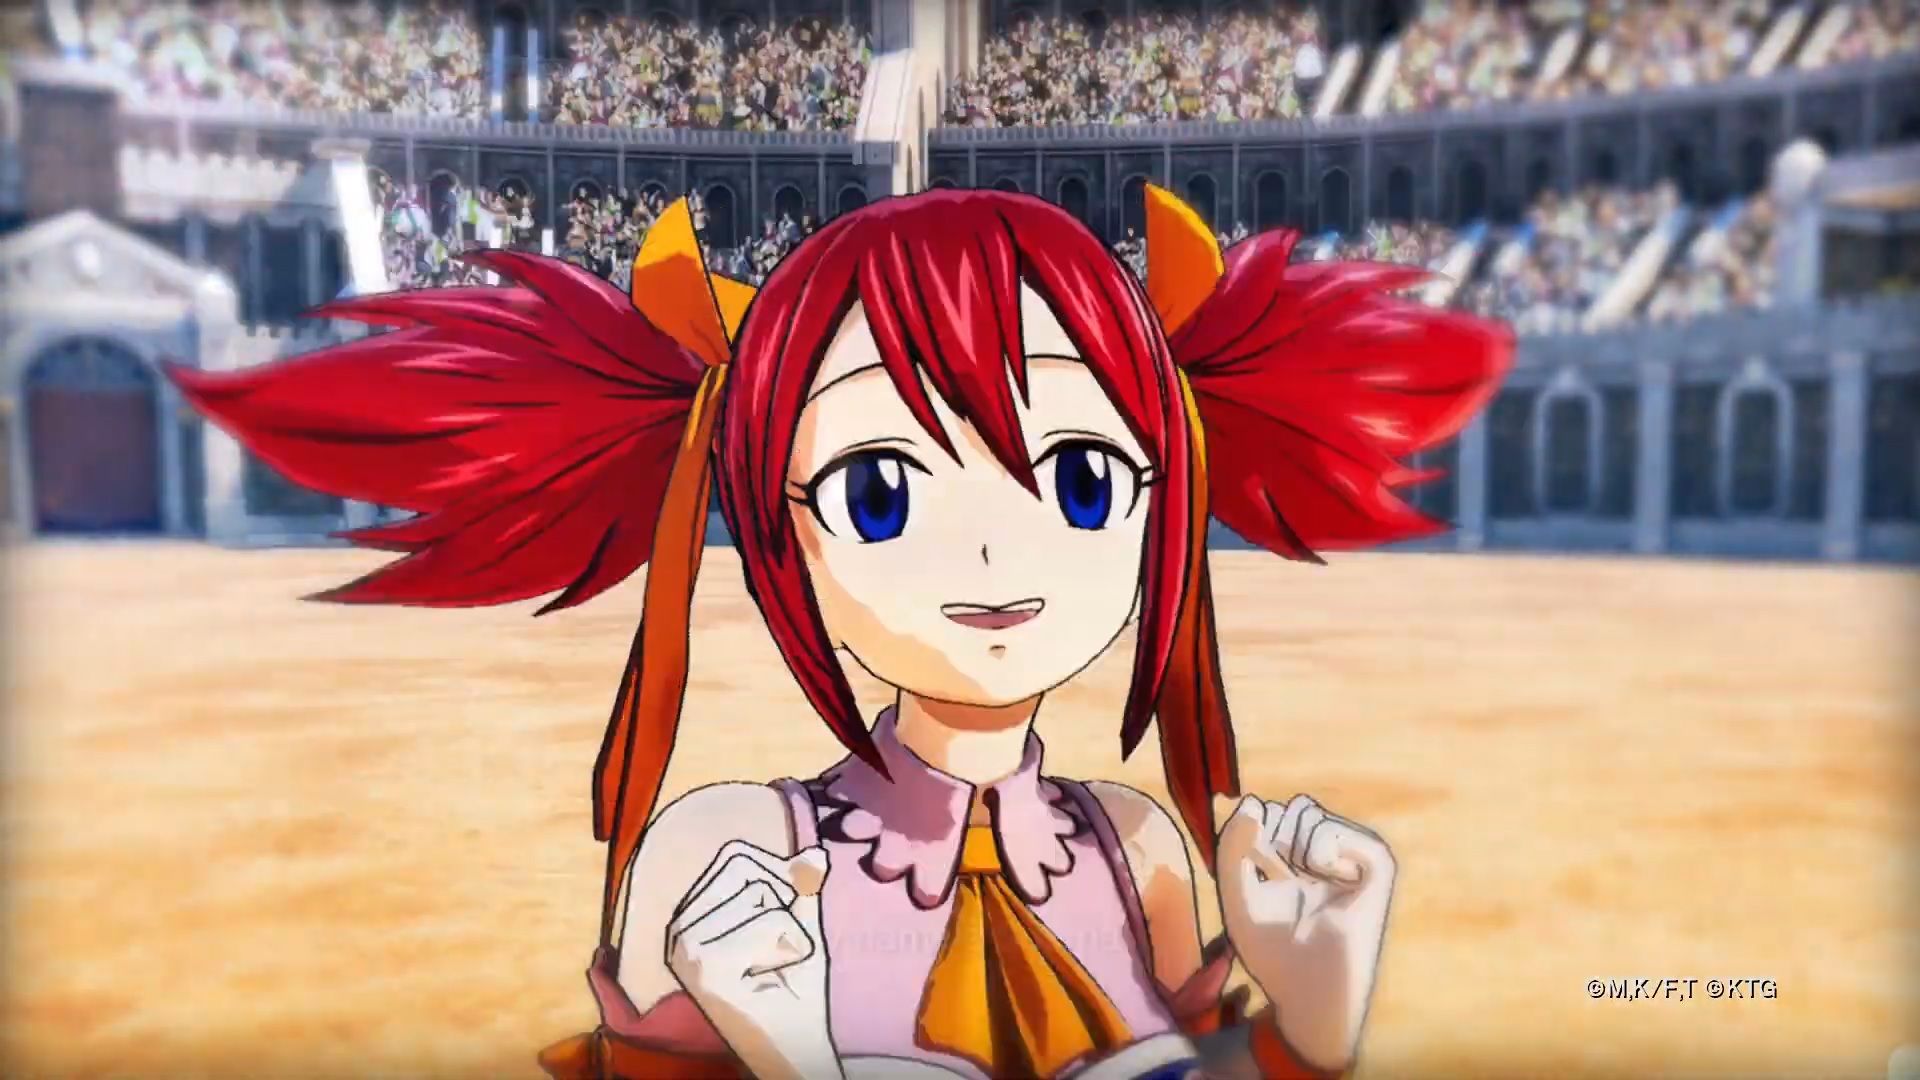 Fairy Tail Game Release Date Worldwide Set for March 2020